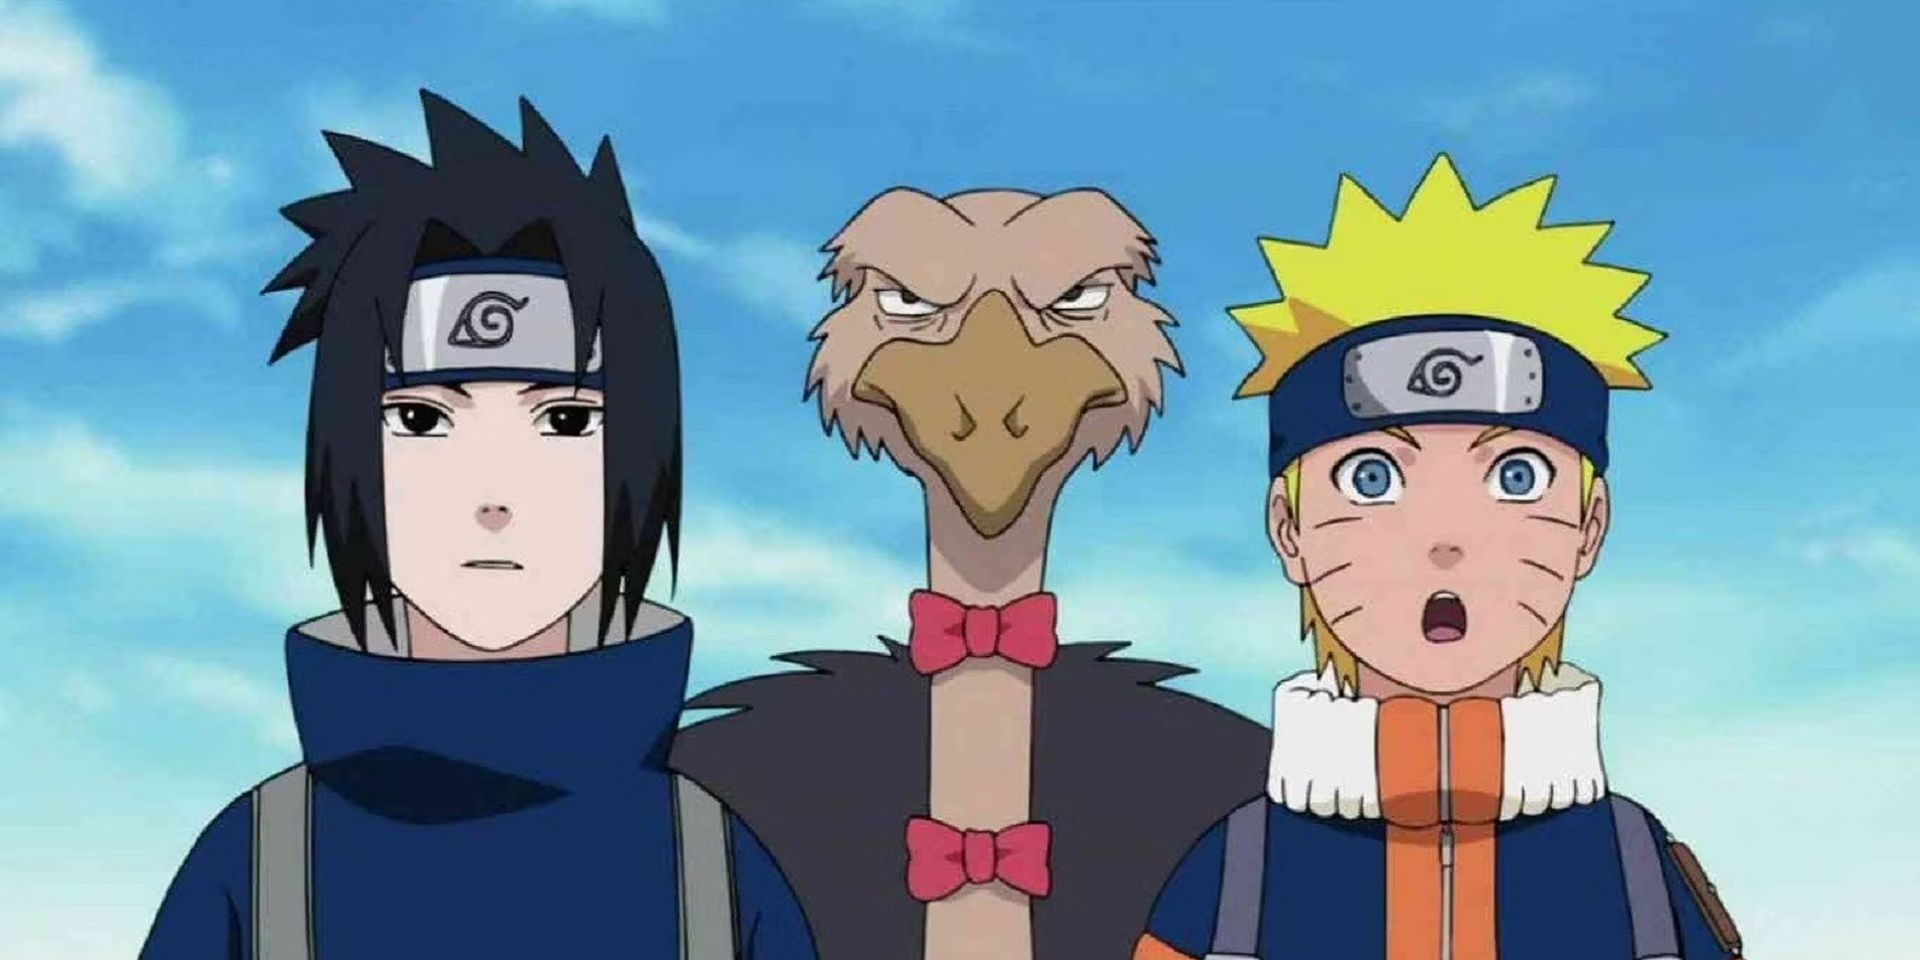 Naruto and Sasuke standing by an ostrich